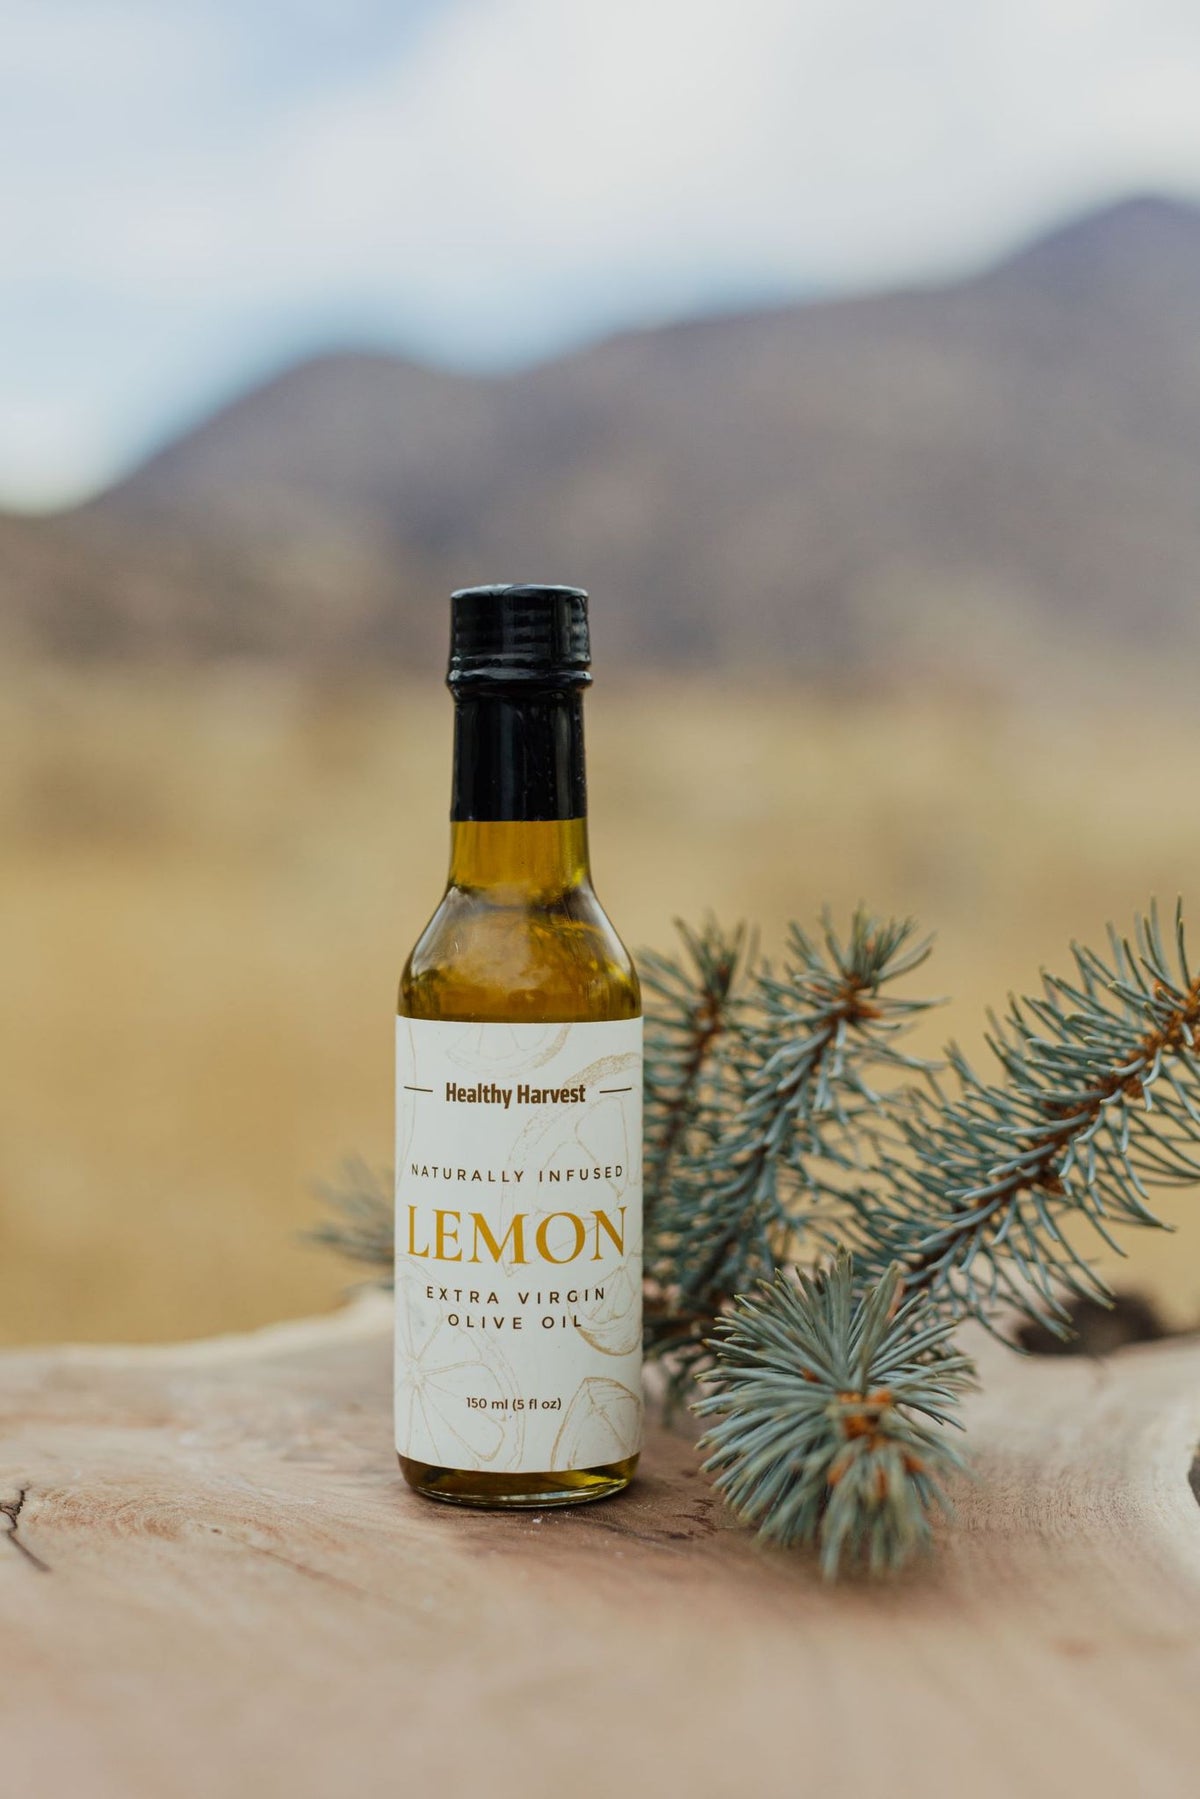 Lemon Infused Olive Oil photographed with a sprig of pine and out of focus mountain landscape in background